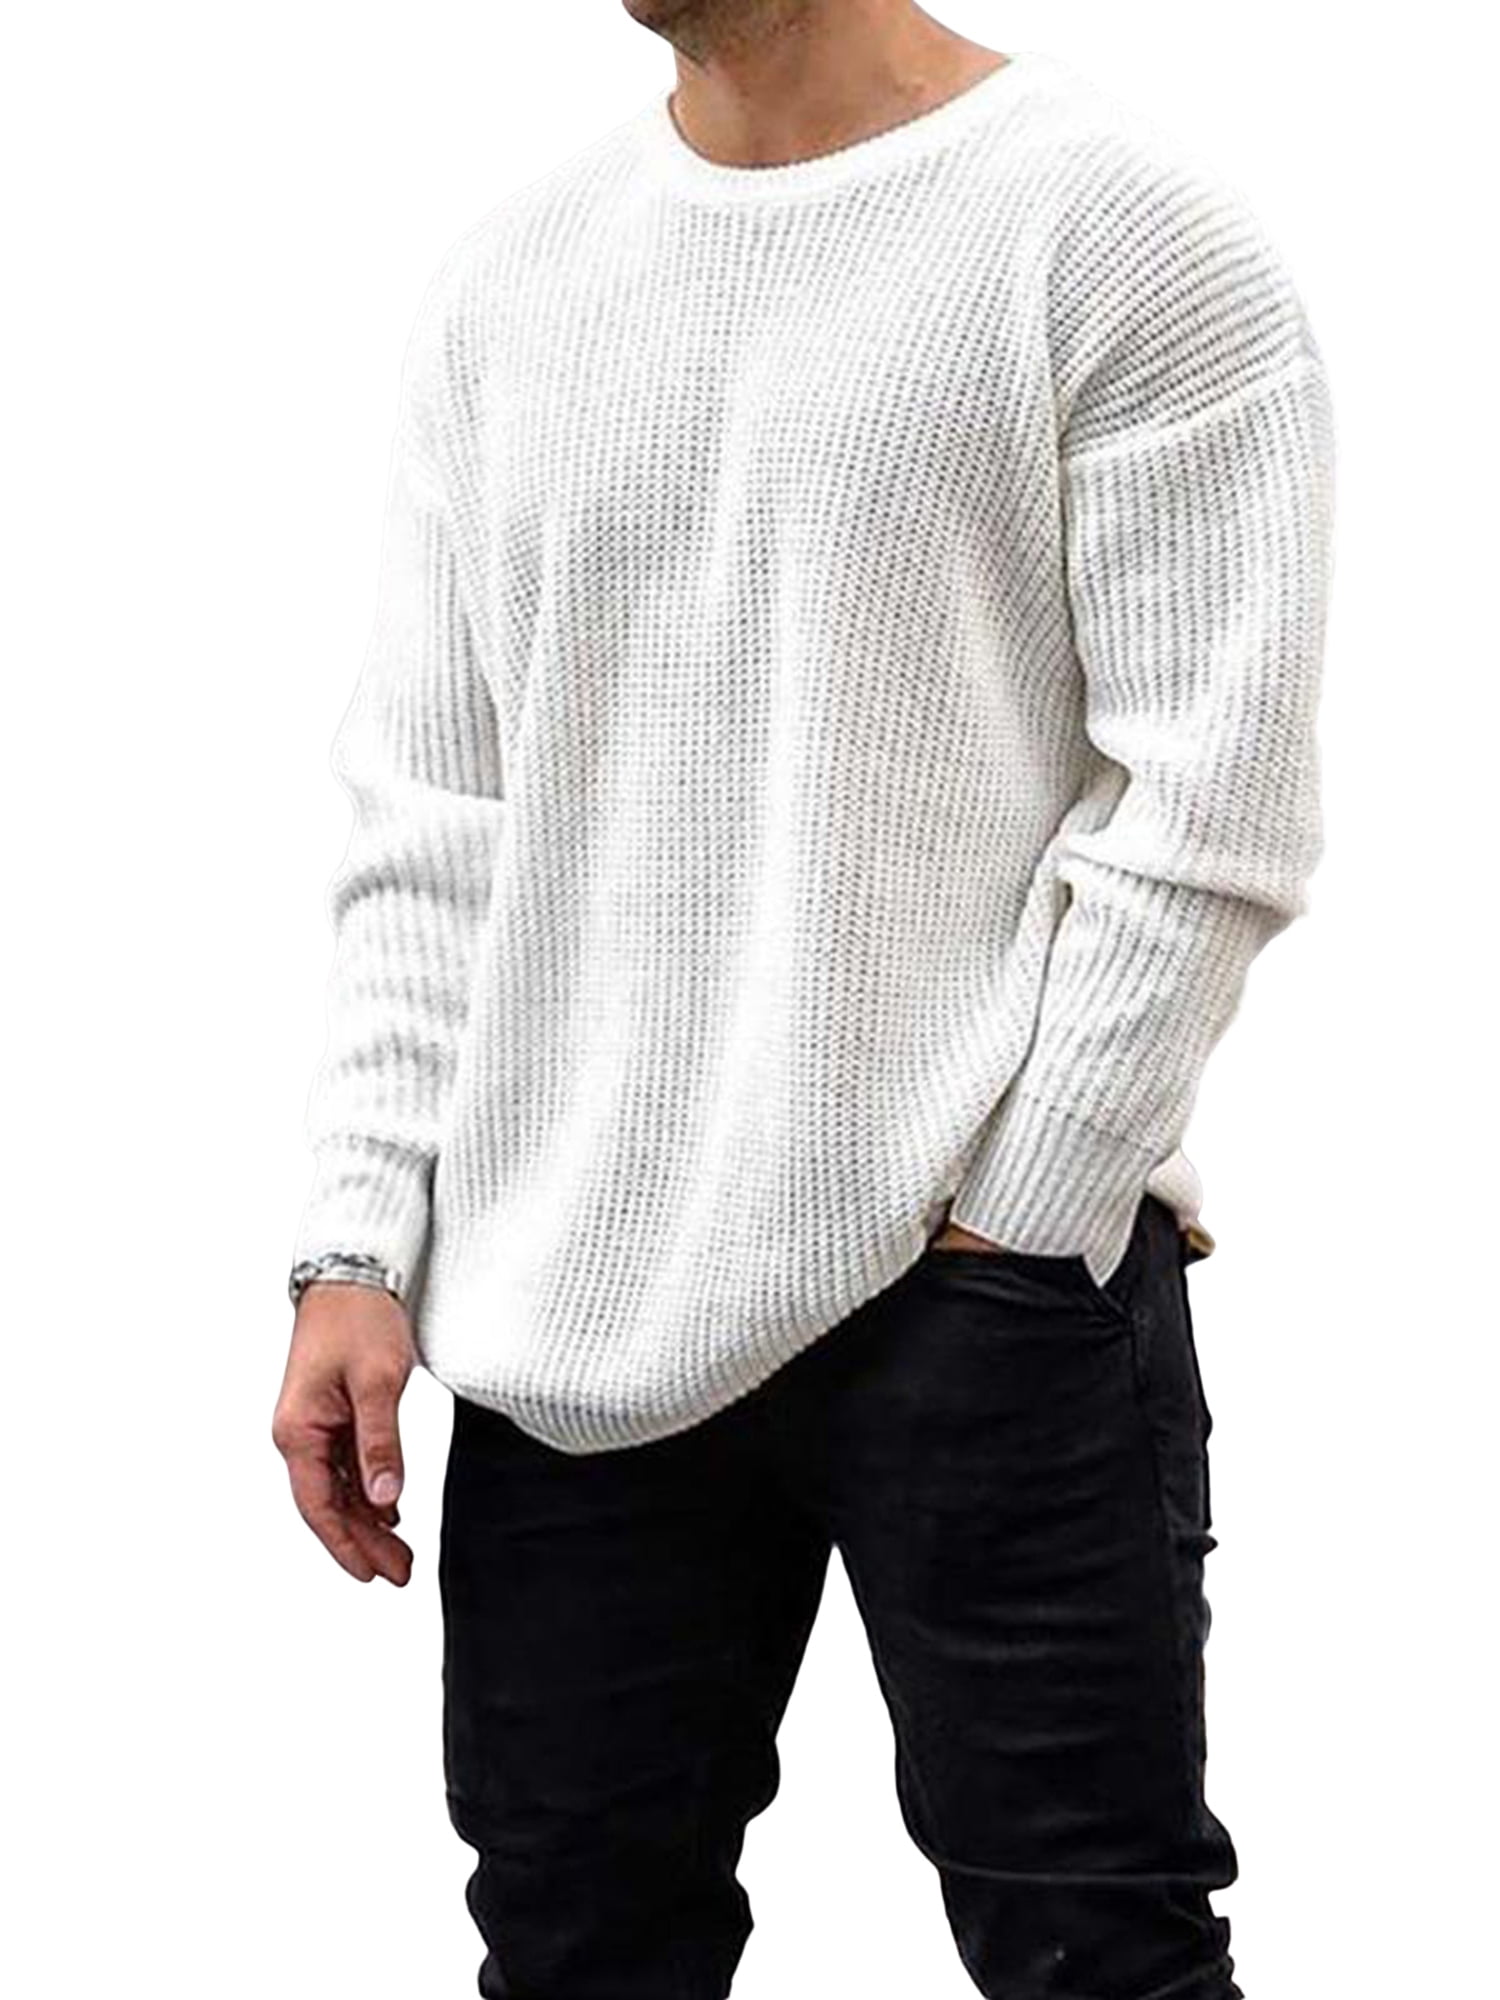 DressU Mens Long-Sleeve Knitwear Plaid Strong Elasticity Pullover Round Collar Sweaters